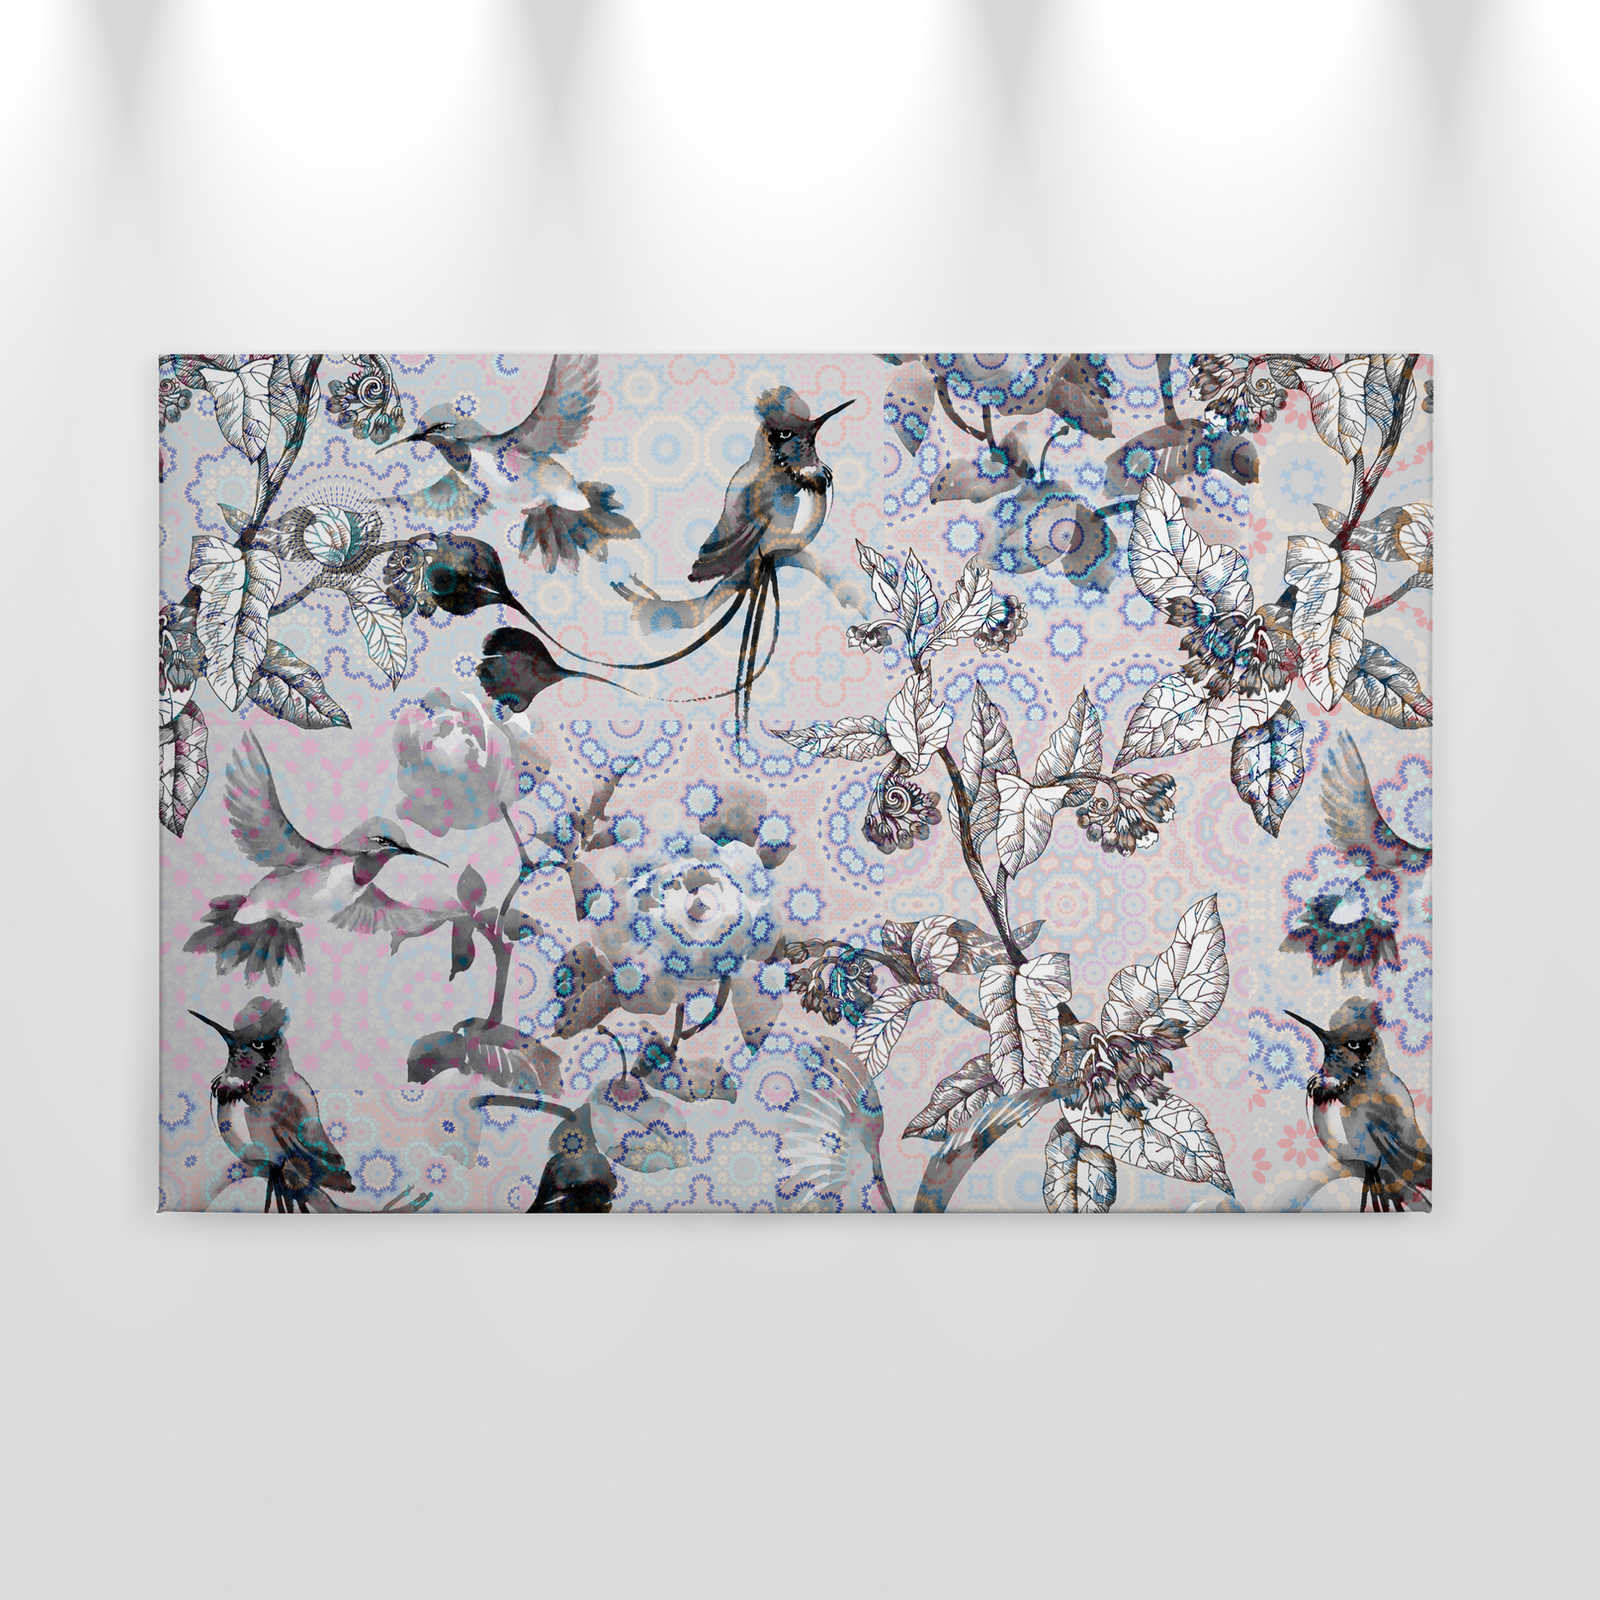             Canvas painting Nature Design in collage style | exotic mosaic 3 - 0,90 m x 0,60 m
        